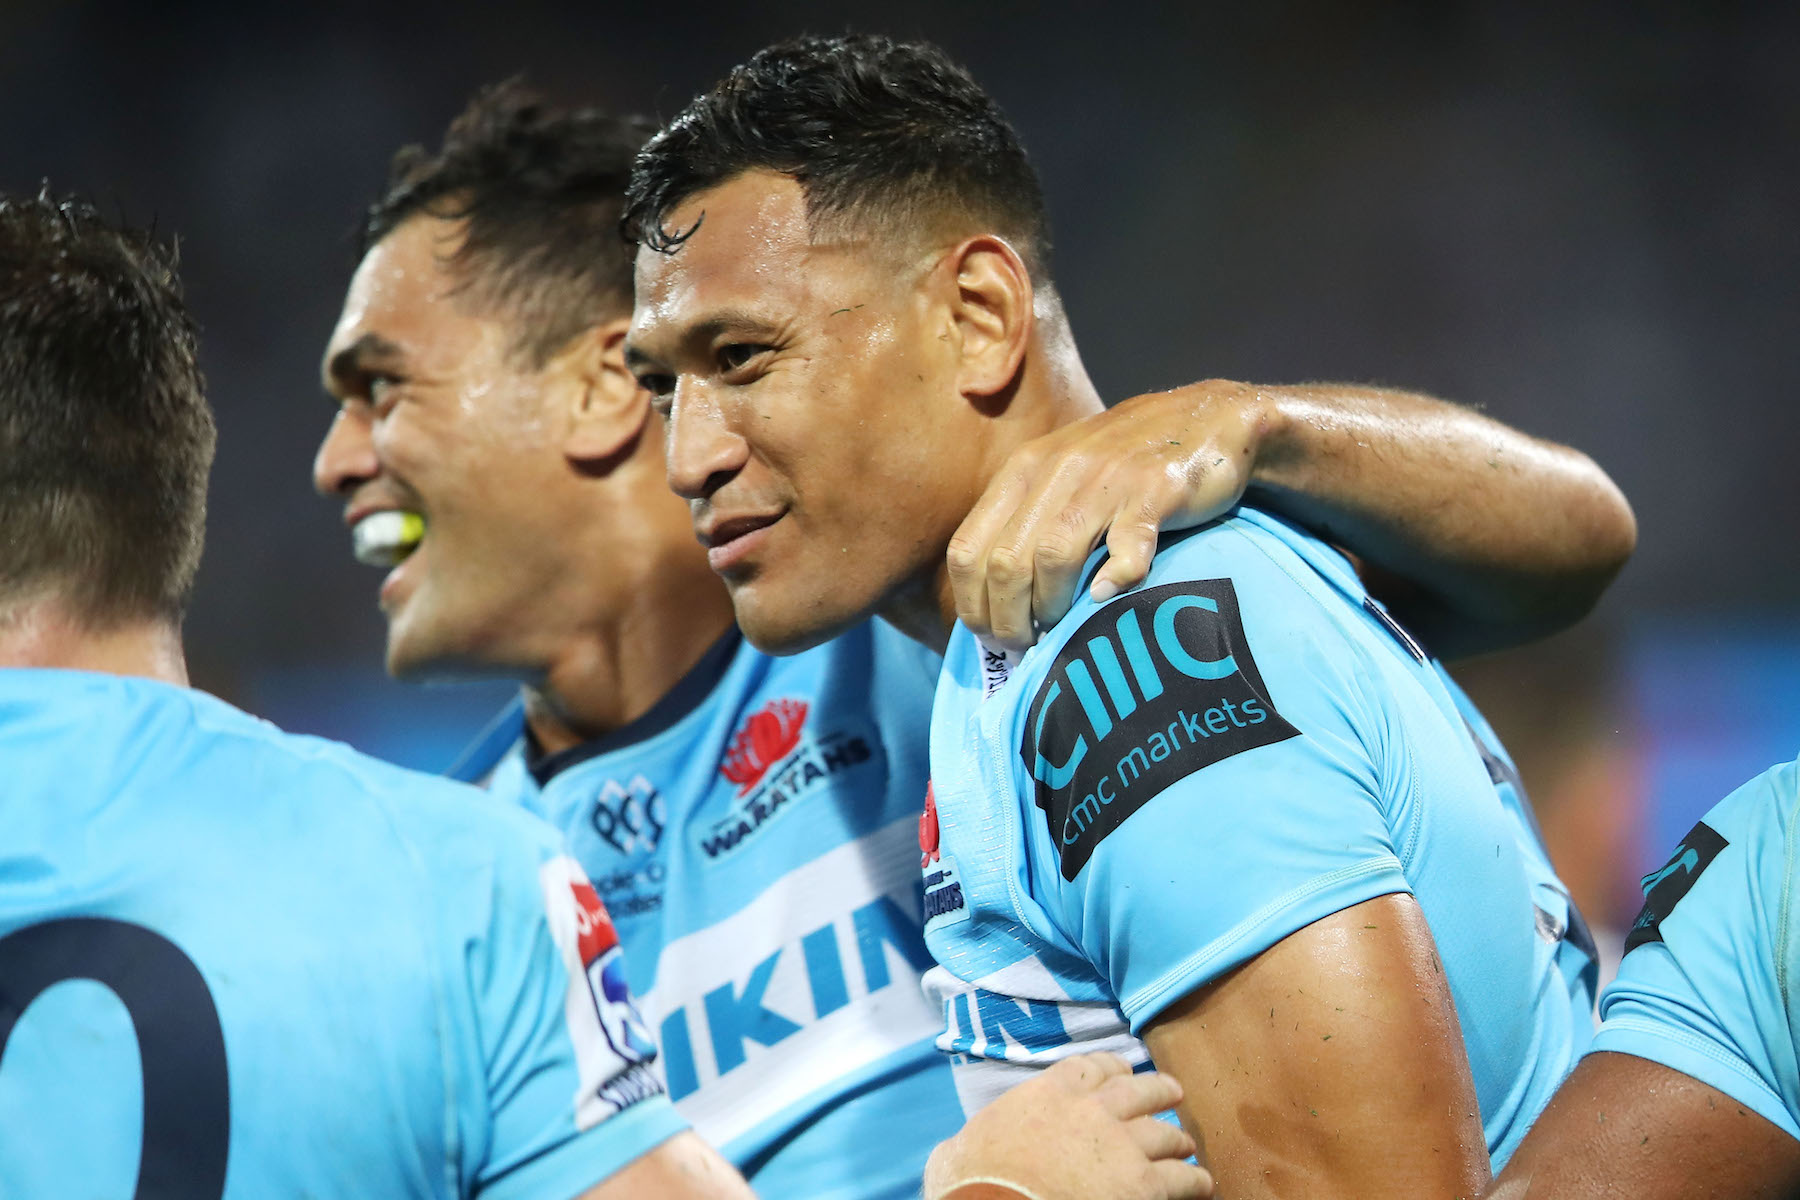 Israel Folau Fundraiser Tops A$2 Million Thanks to Support From Australian Christian Lobby